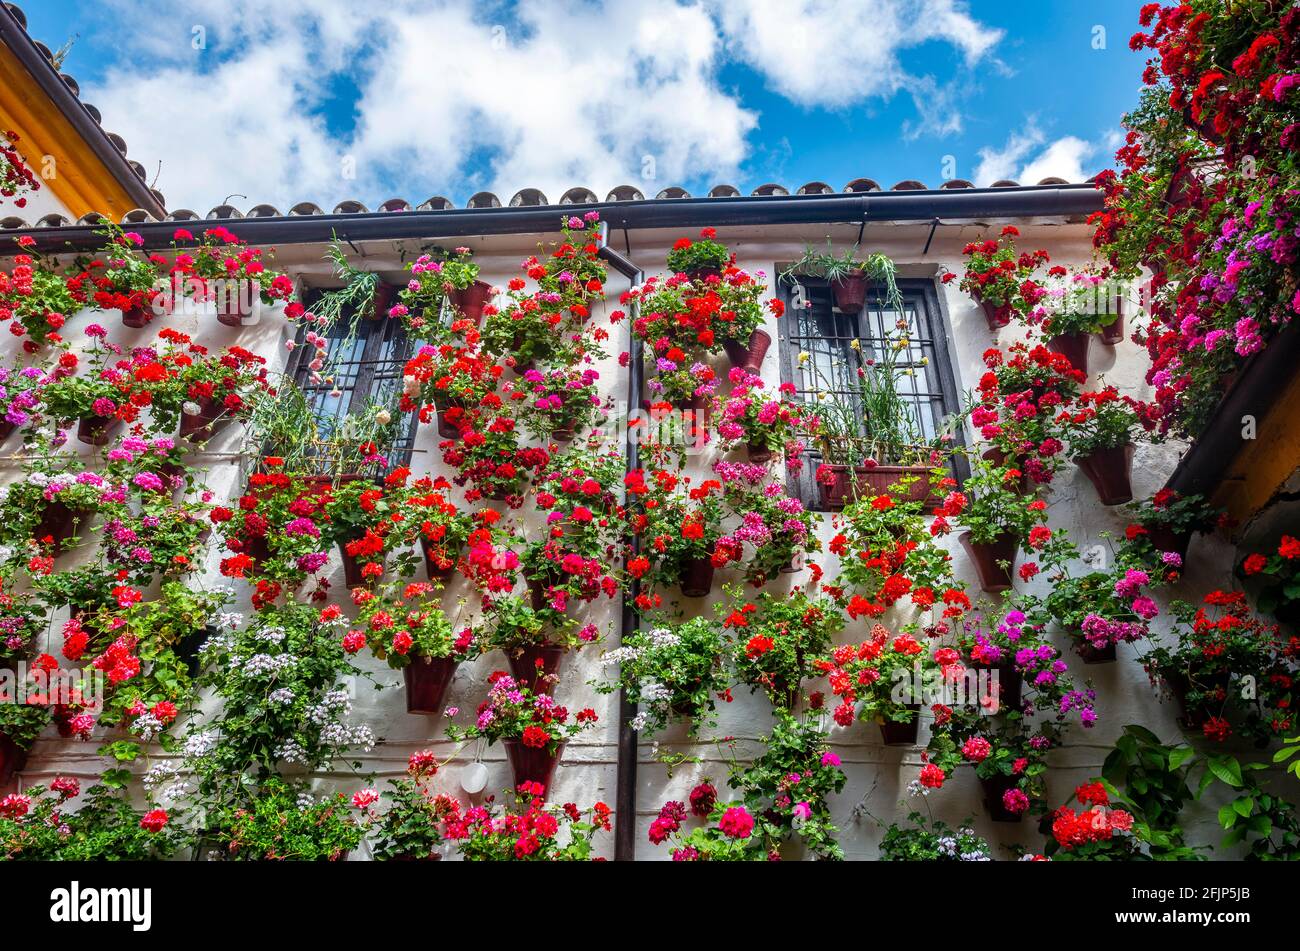 Many red geraniums in flower pots on the house wall, decorated inner courtyard, Fiesta de los Patios, Cordoba, Andalusia, Spain Stock Photo